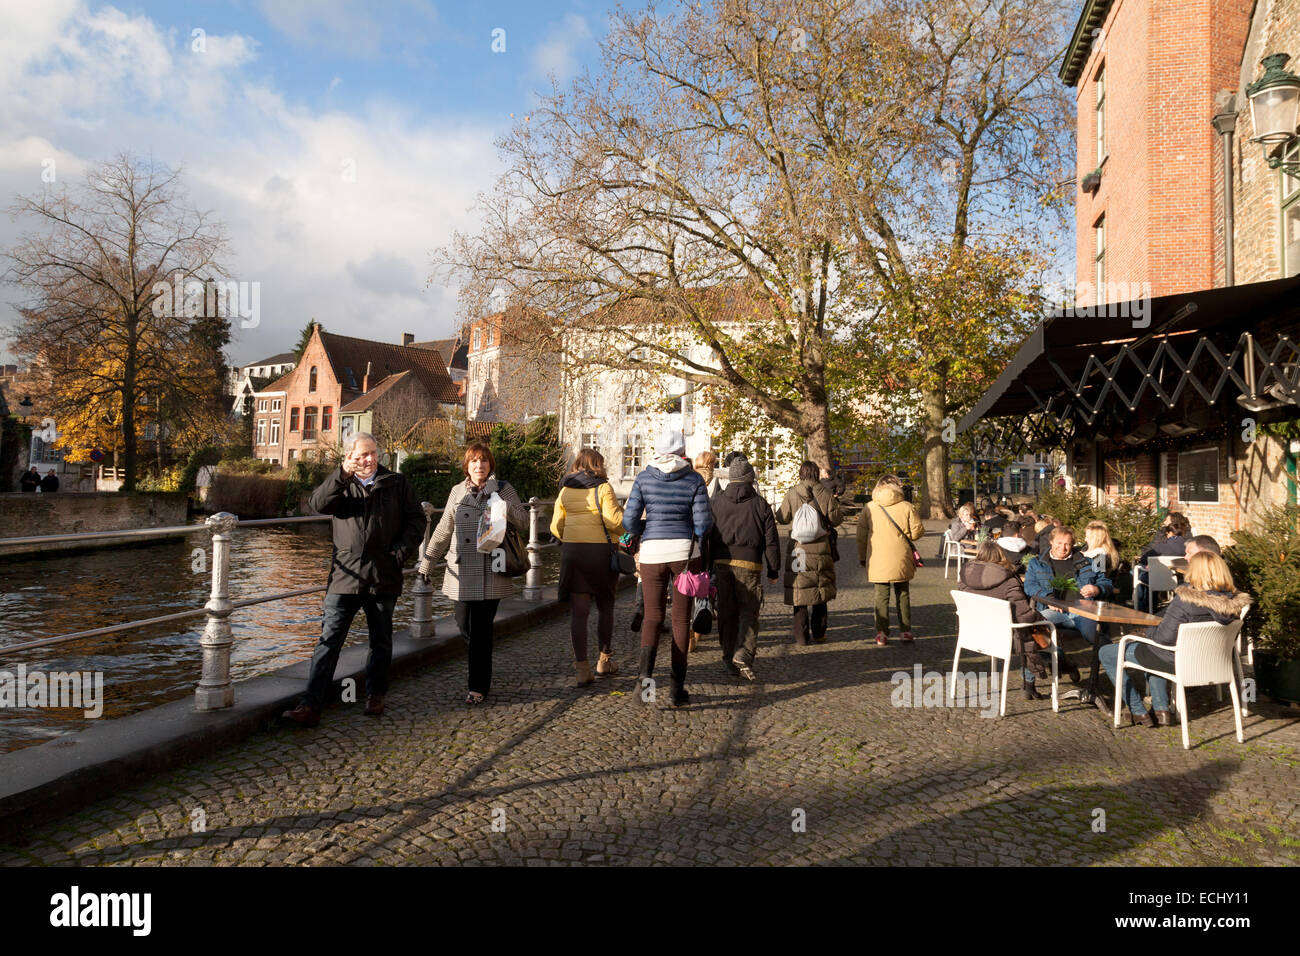 people walking on cobblestones beside the canal in autumn, Bruges, Belgium, Europe Stock Photo